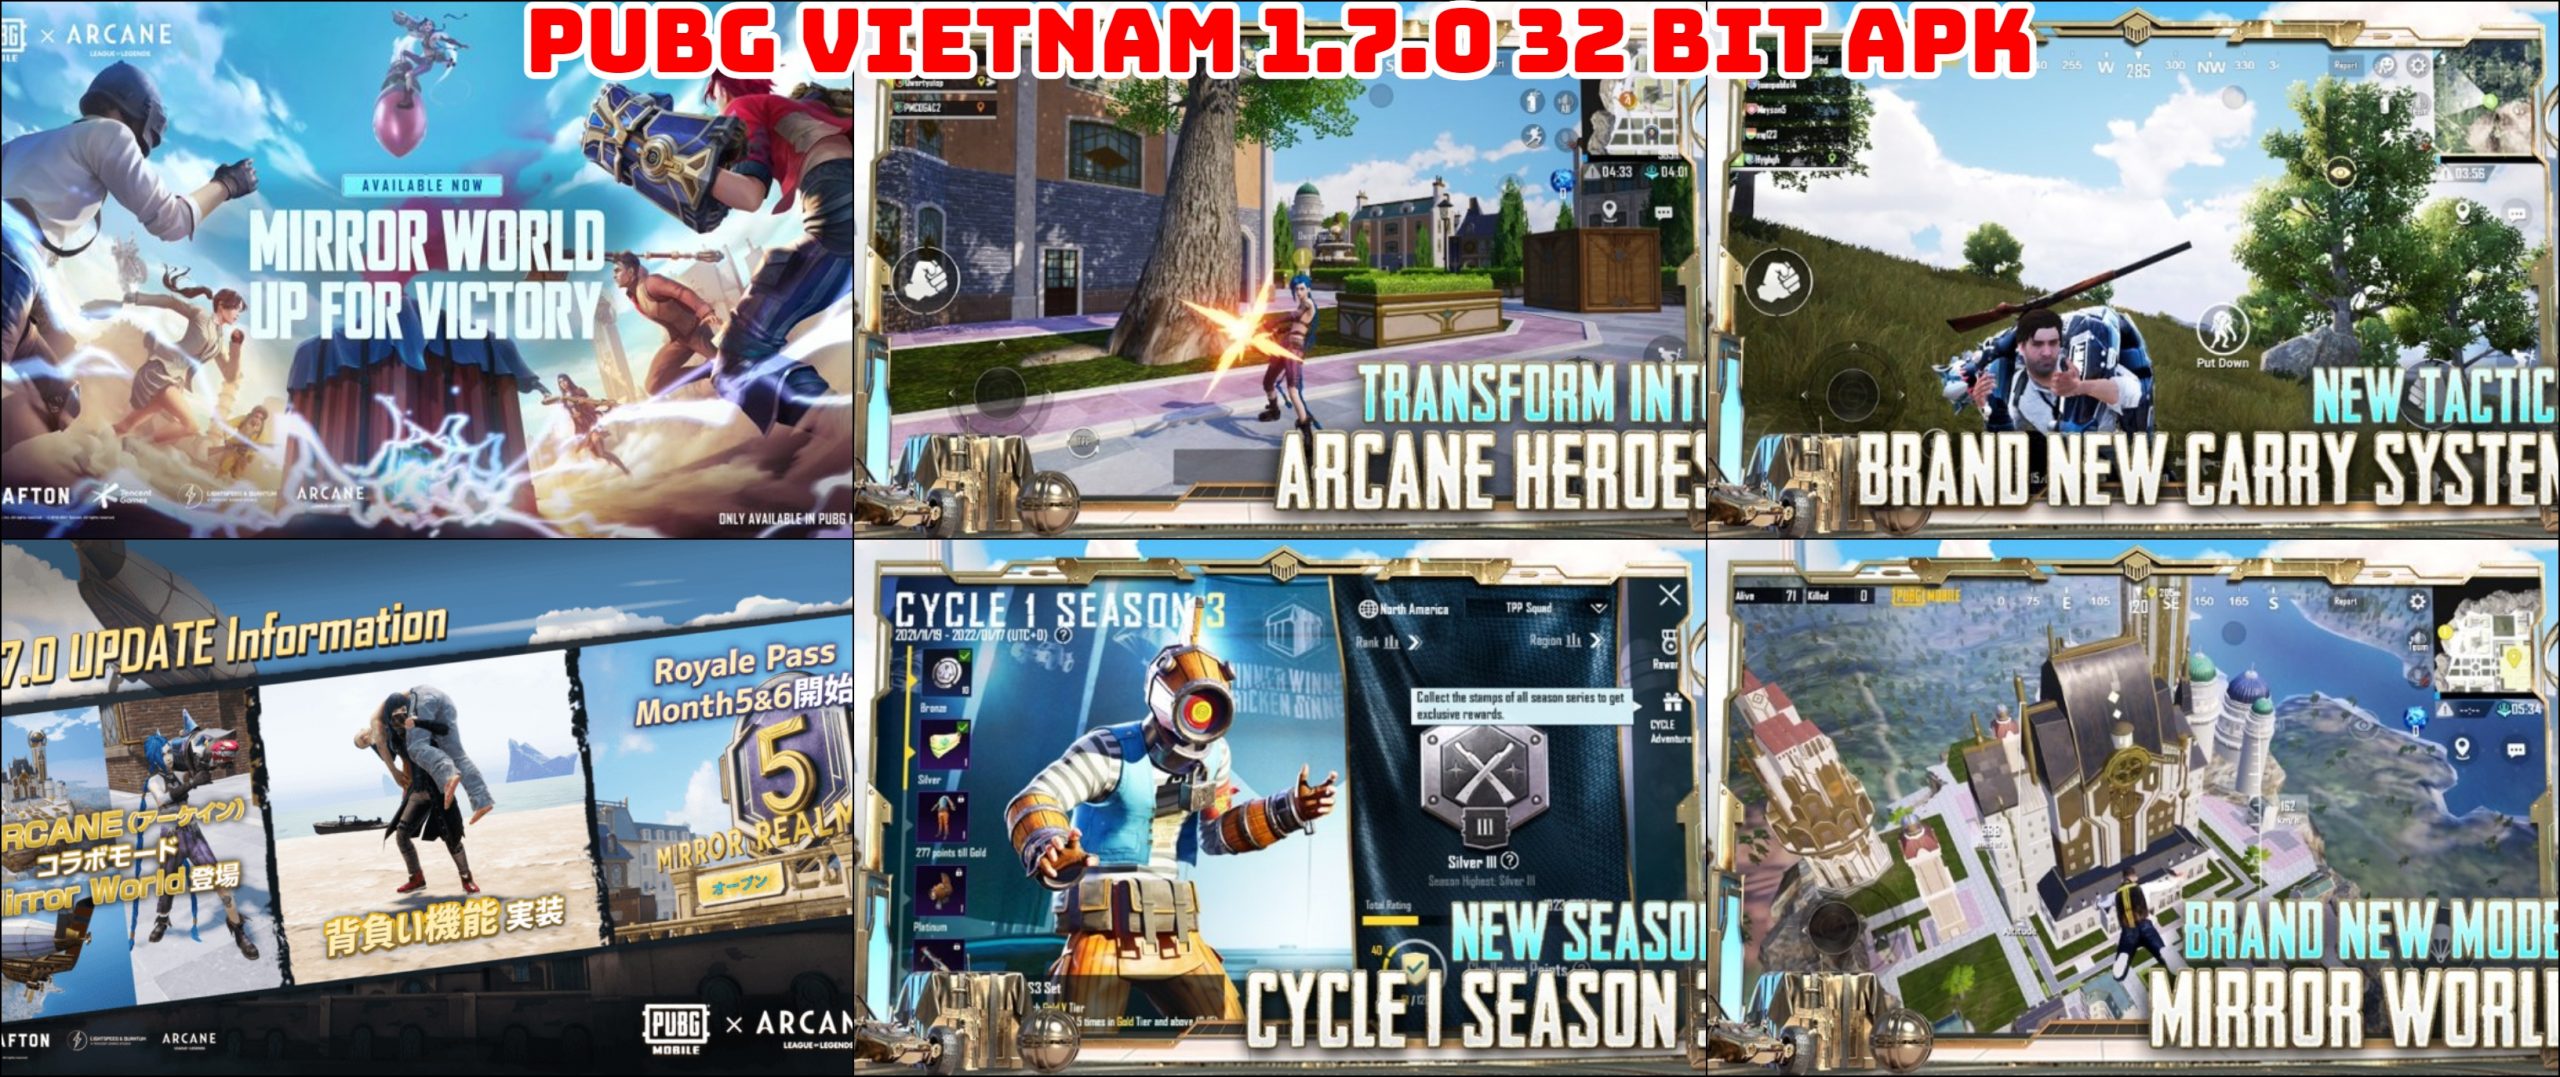 You are currently viewing PUBG Vietnam 1.7.0 32 Bit Apk + OBB Download